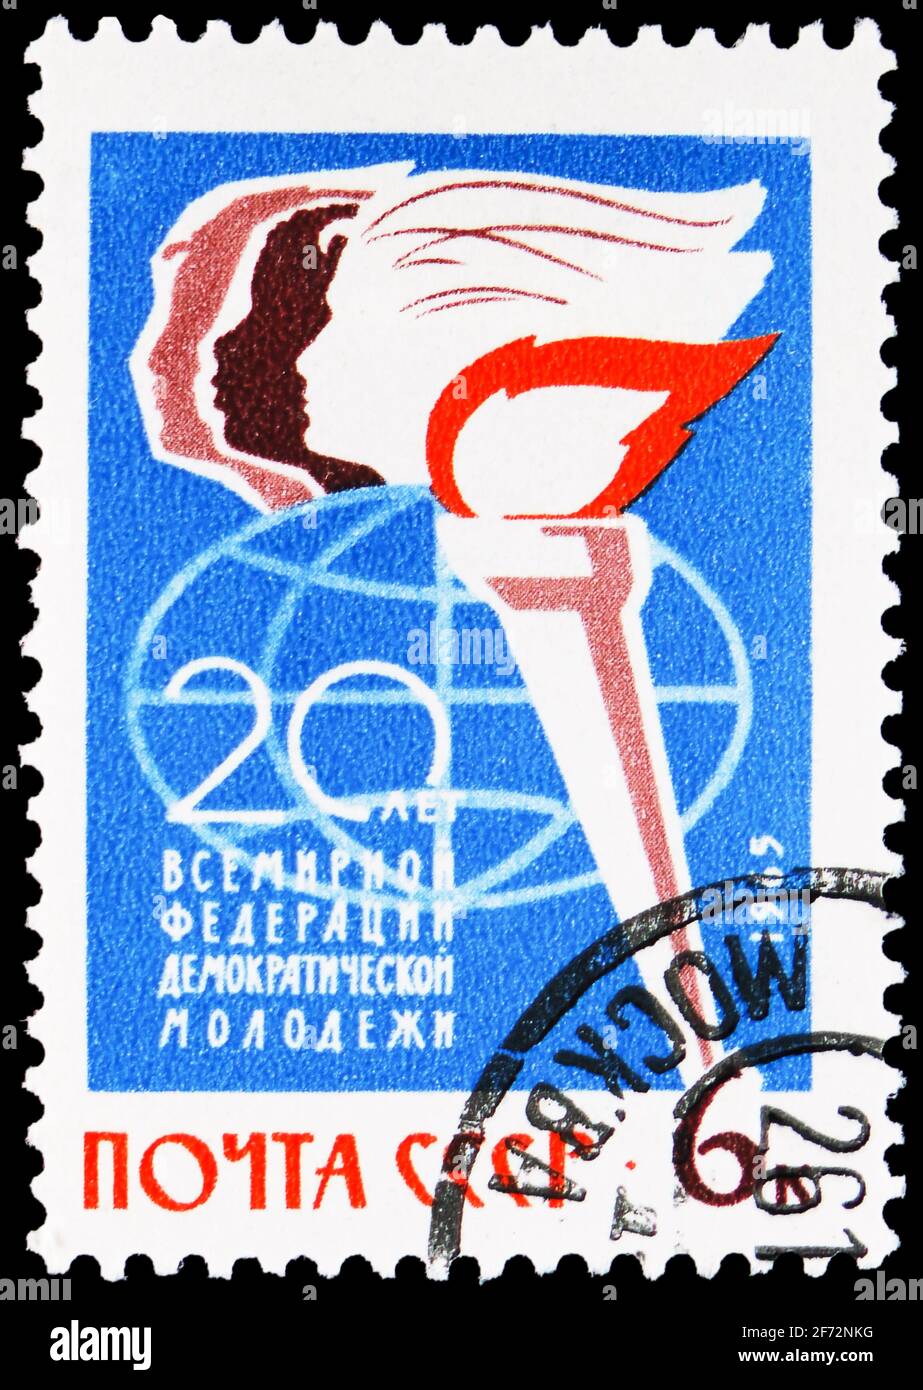 MOSCOW, RUSSIA - JANUARY 12, 2021: Postage stamp printed in USSR (Russia) shows World Federation of Democratic Youth - Symbols, 20th Anniversary of In Stock Photo